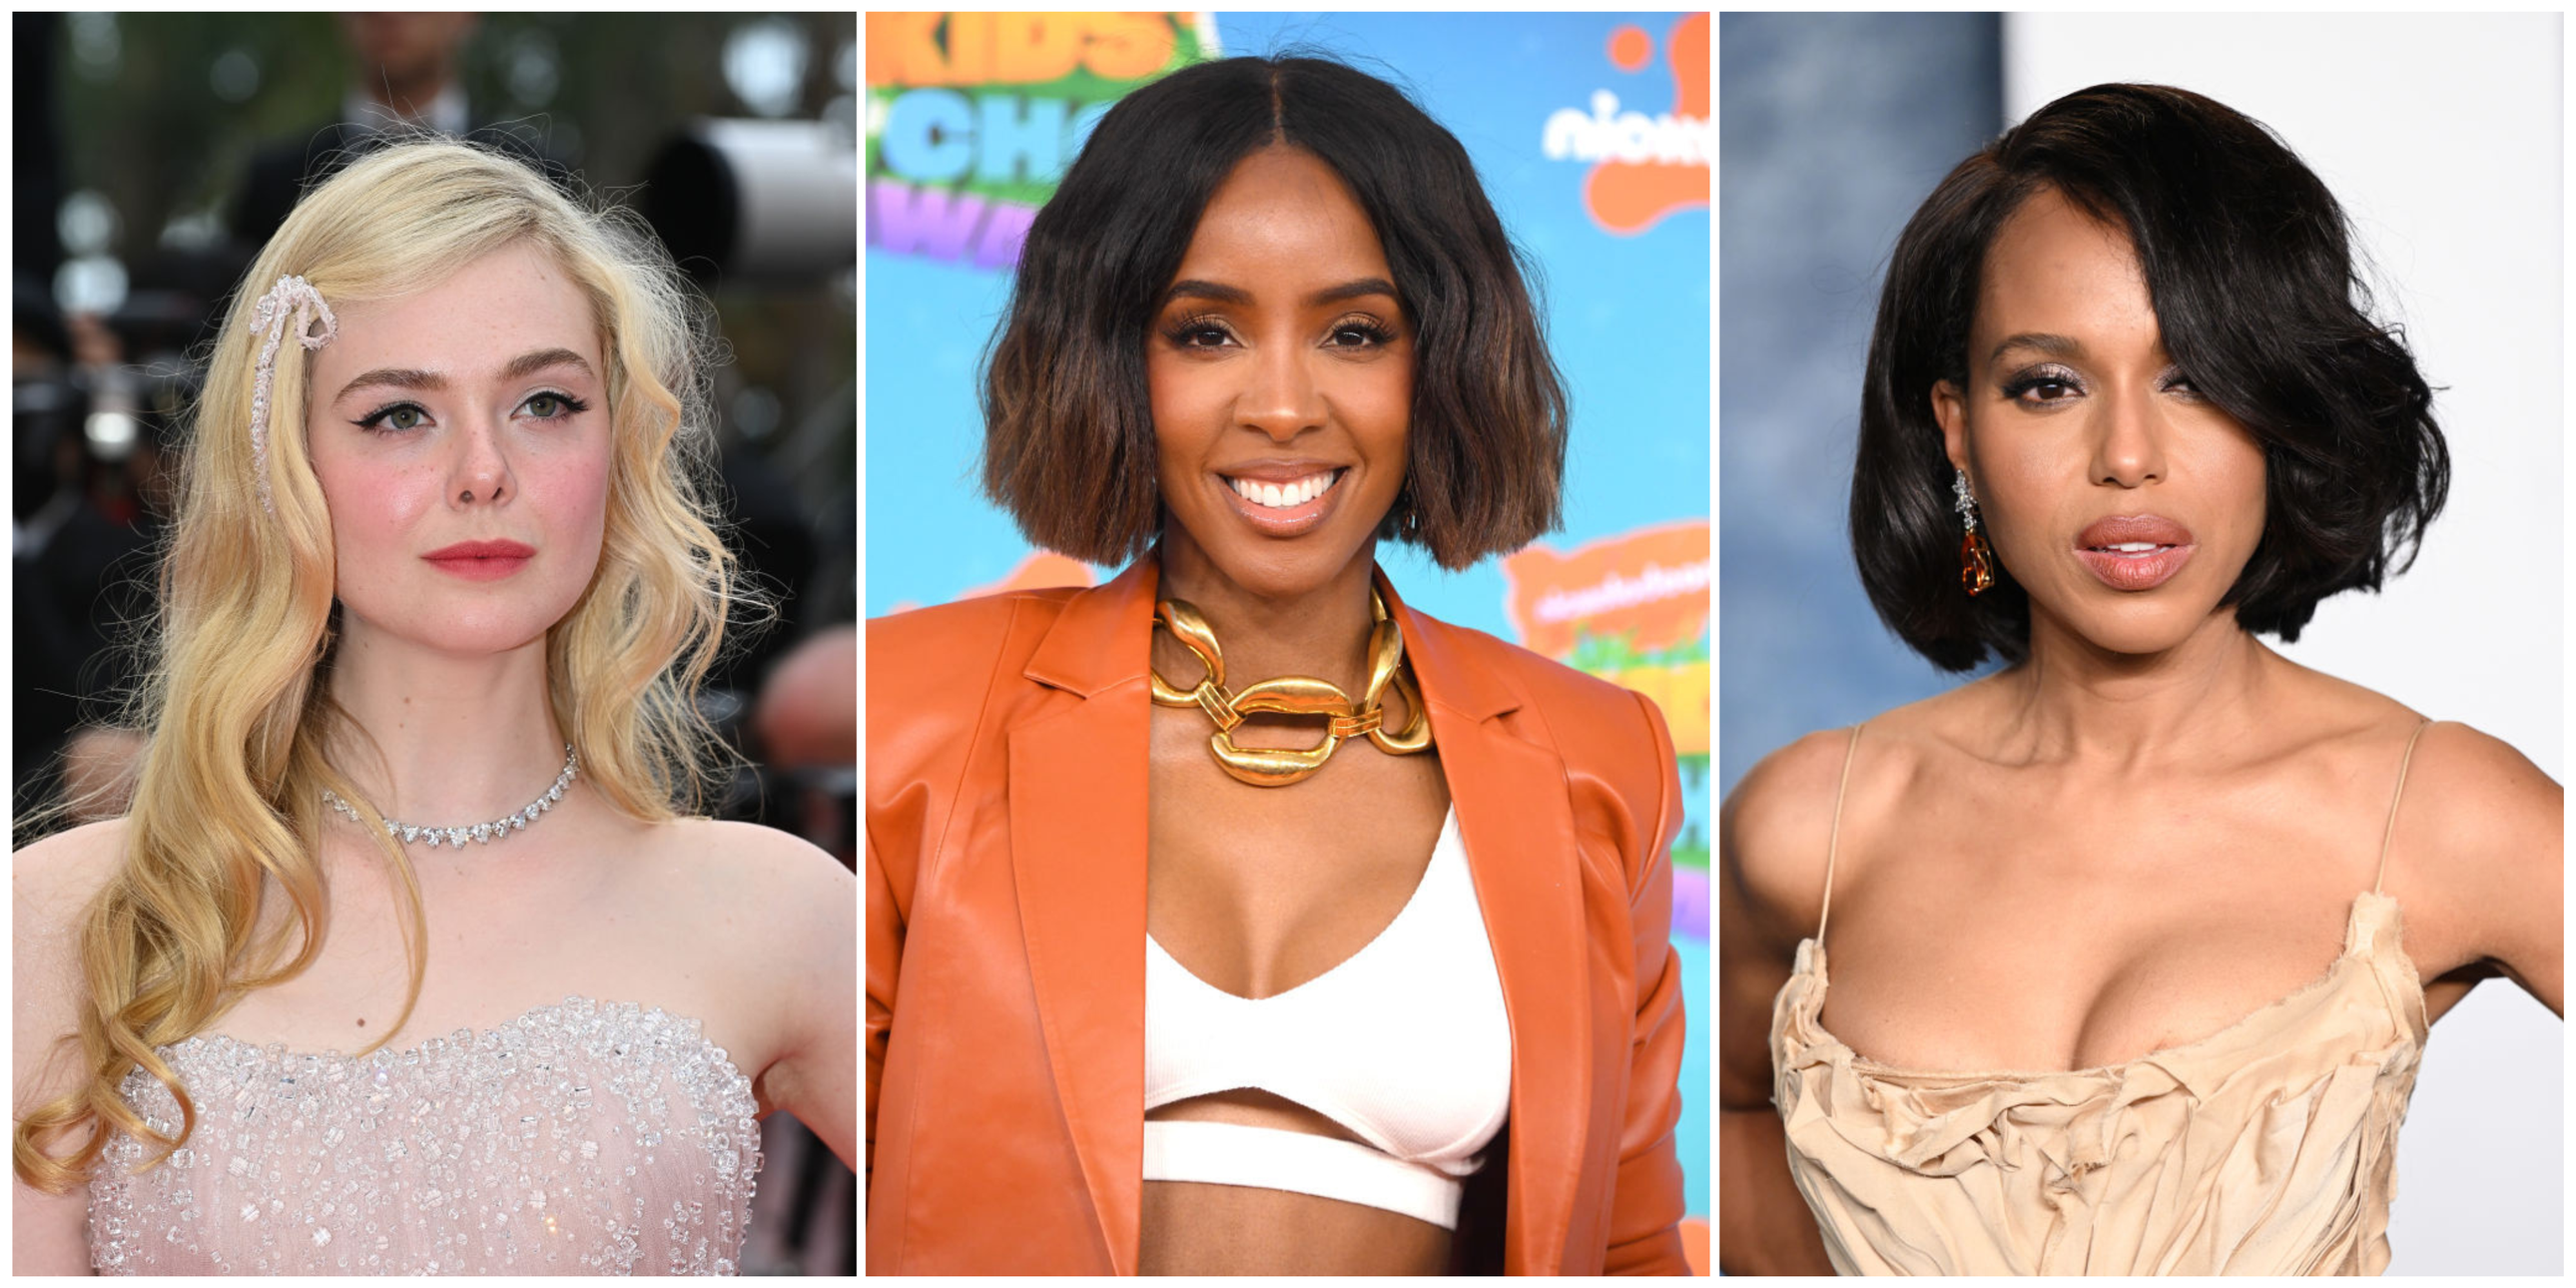 6 Celebrities With Eczema Share What Symptoms Are Really Like